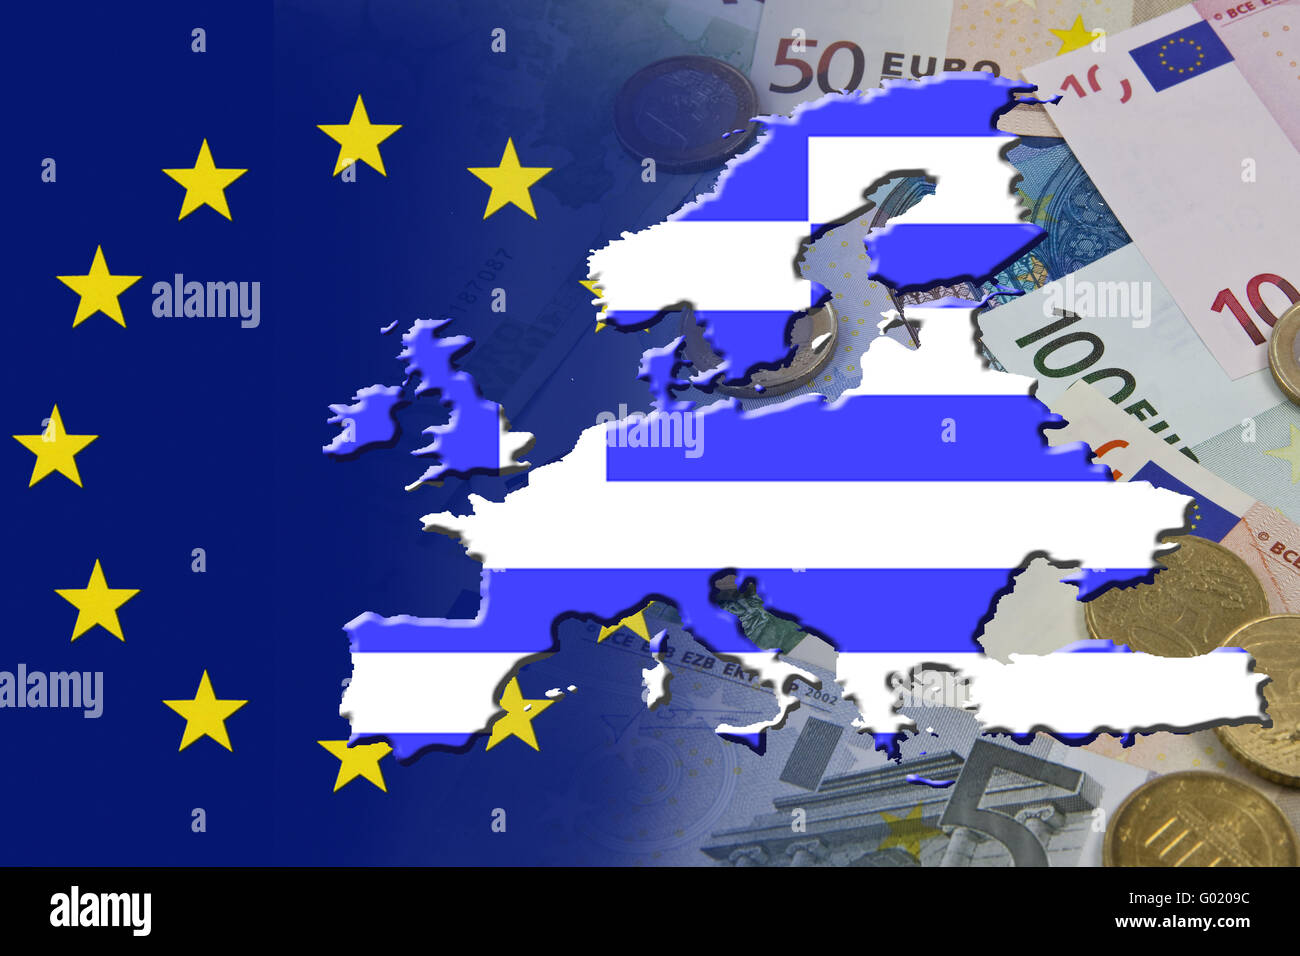 Financial and economic crisis in the euro area in Europe of the country Greece Stock Photo